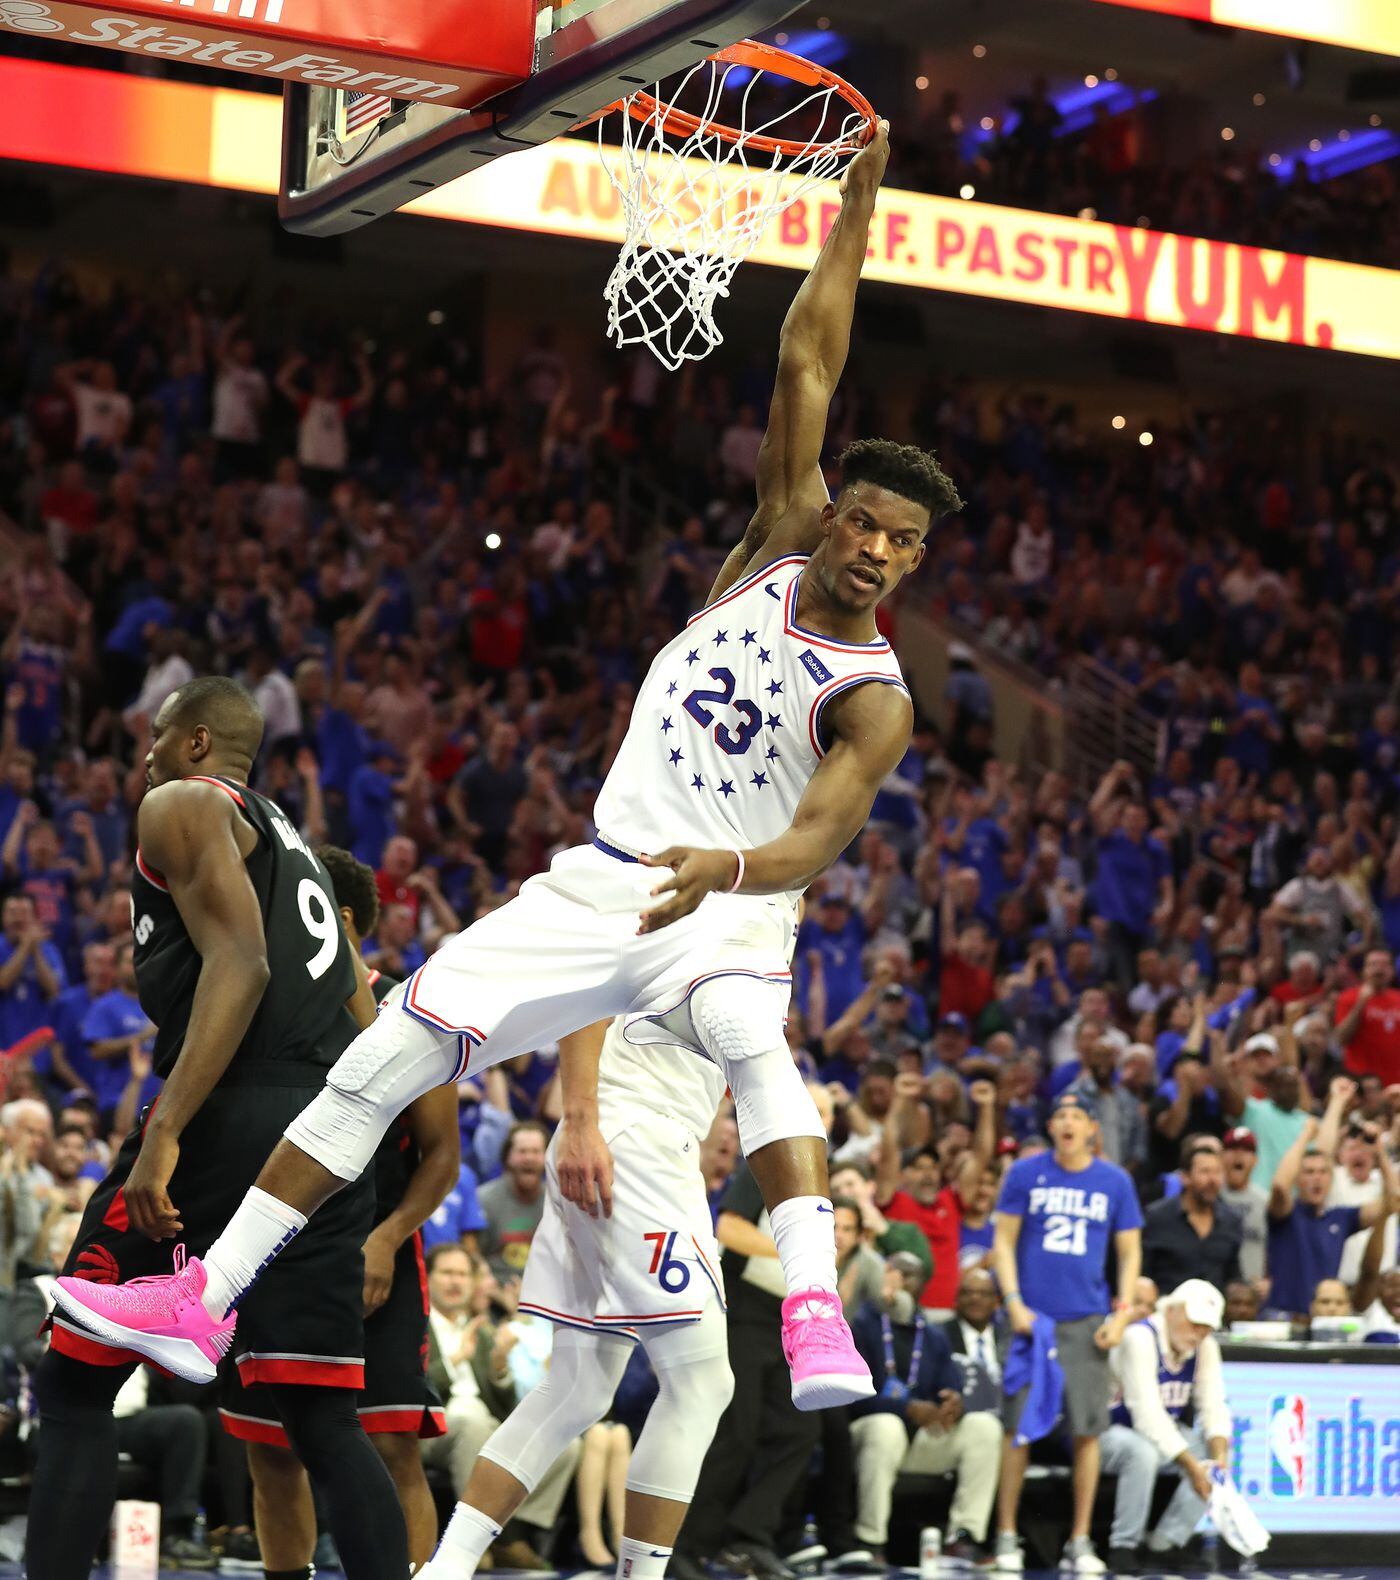 Playoff Jimmy Butler is a welcomed addition to the Sixers